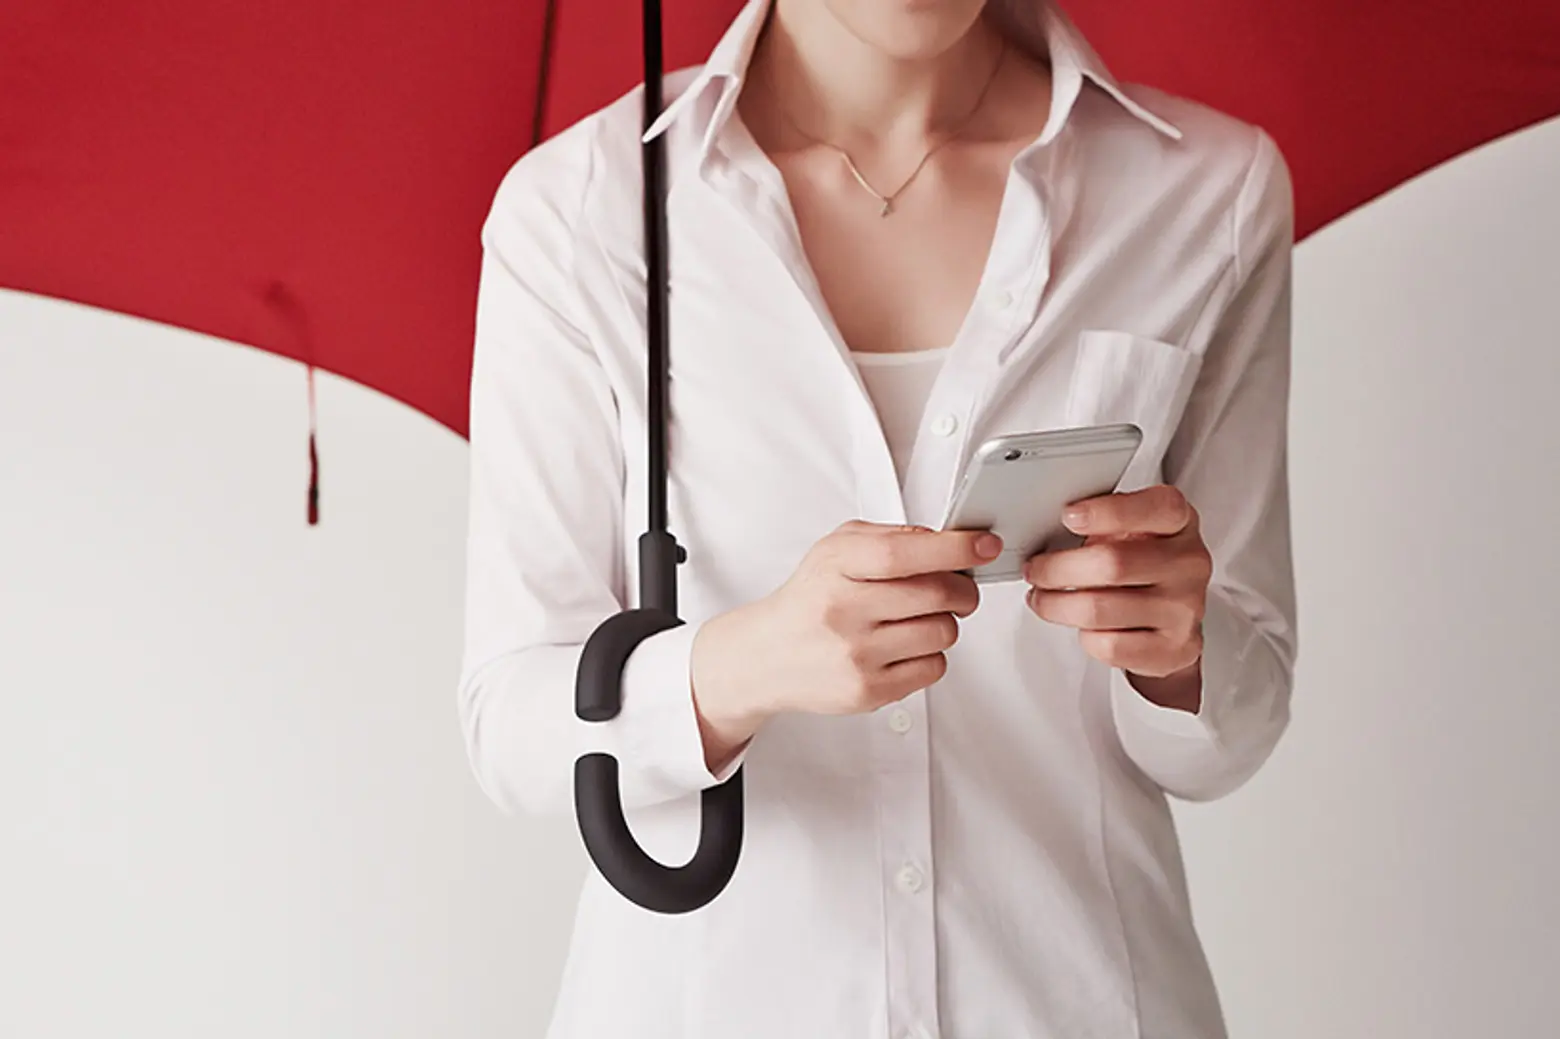 The Phone-brella Makes Texting and Walking on Rainy Days a Cinch